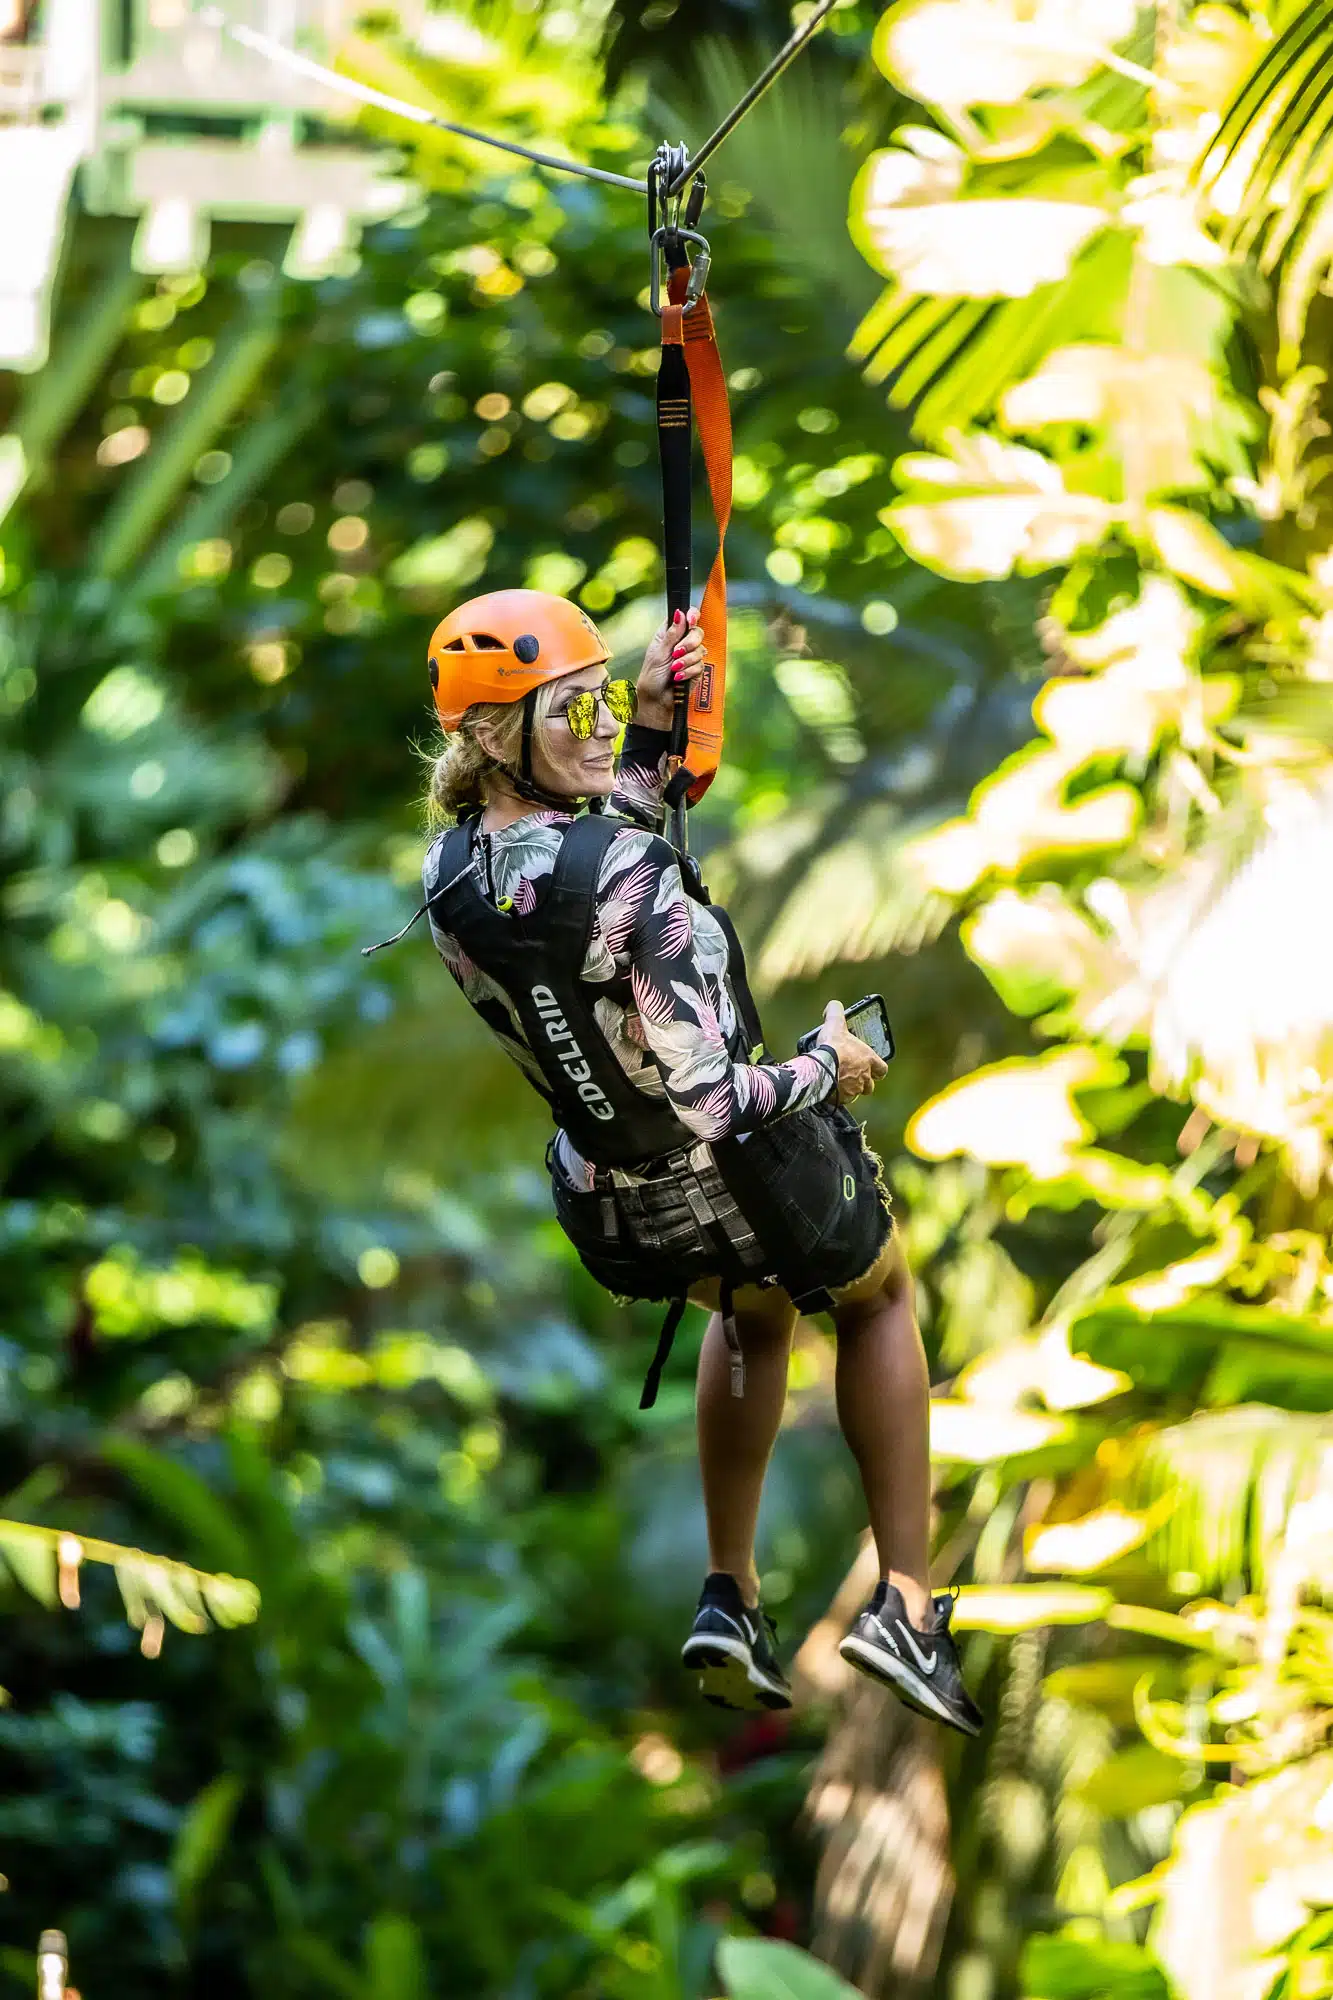 5 Line Zipline Tour is a Land Activity located in the city of Haiku on Maui, Hawaii